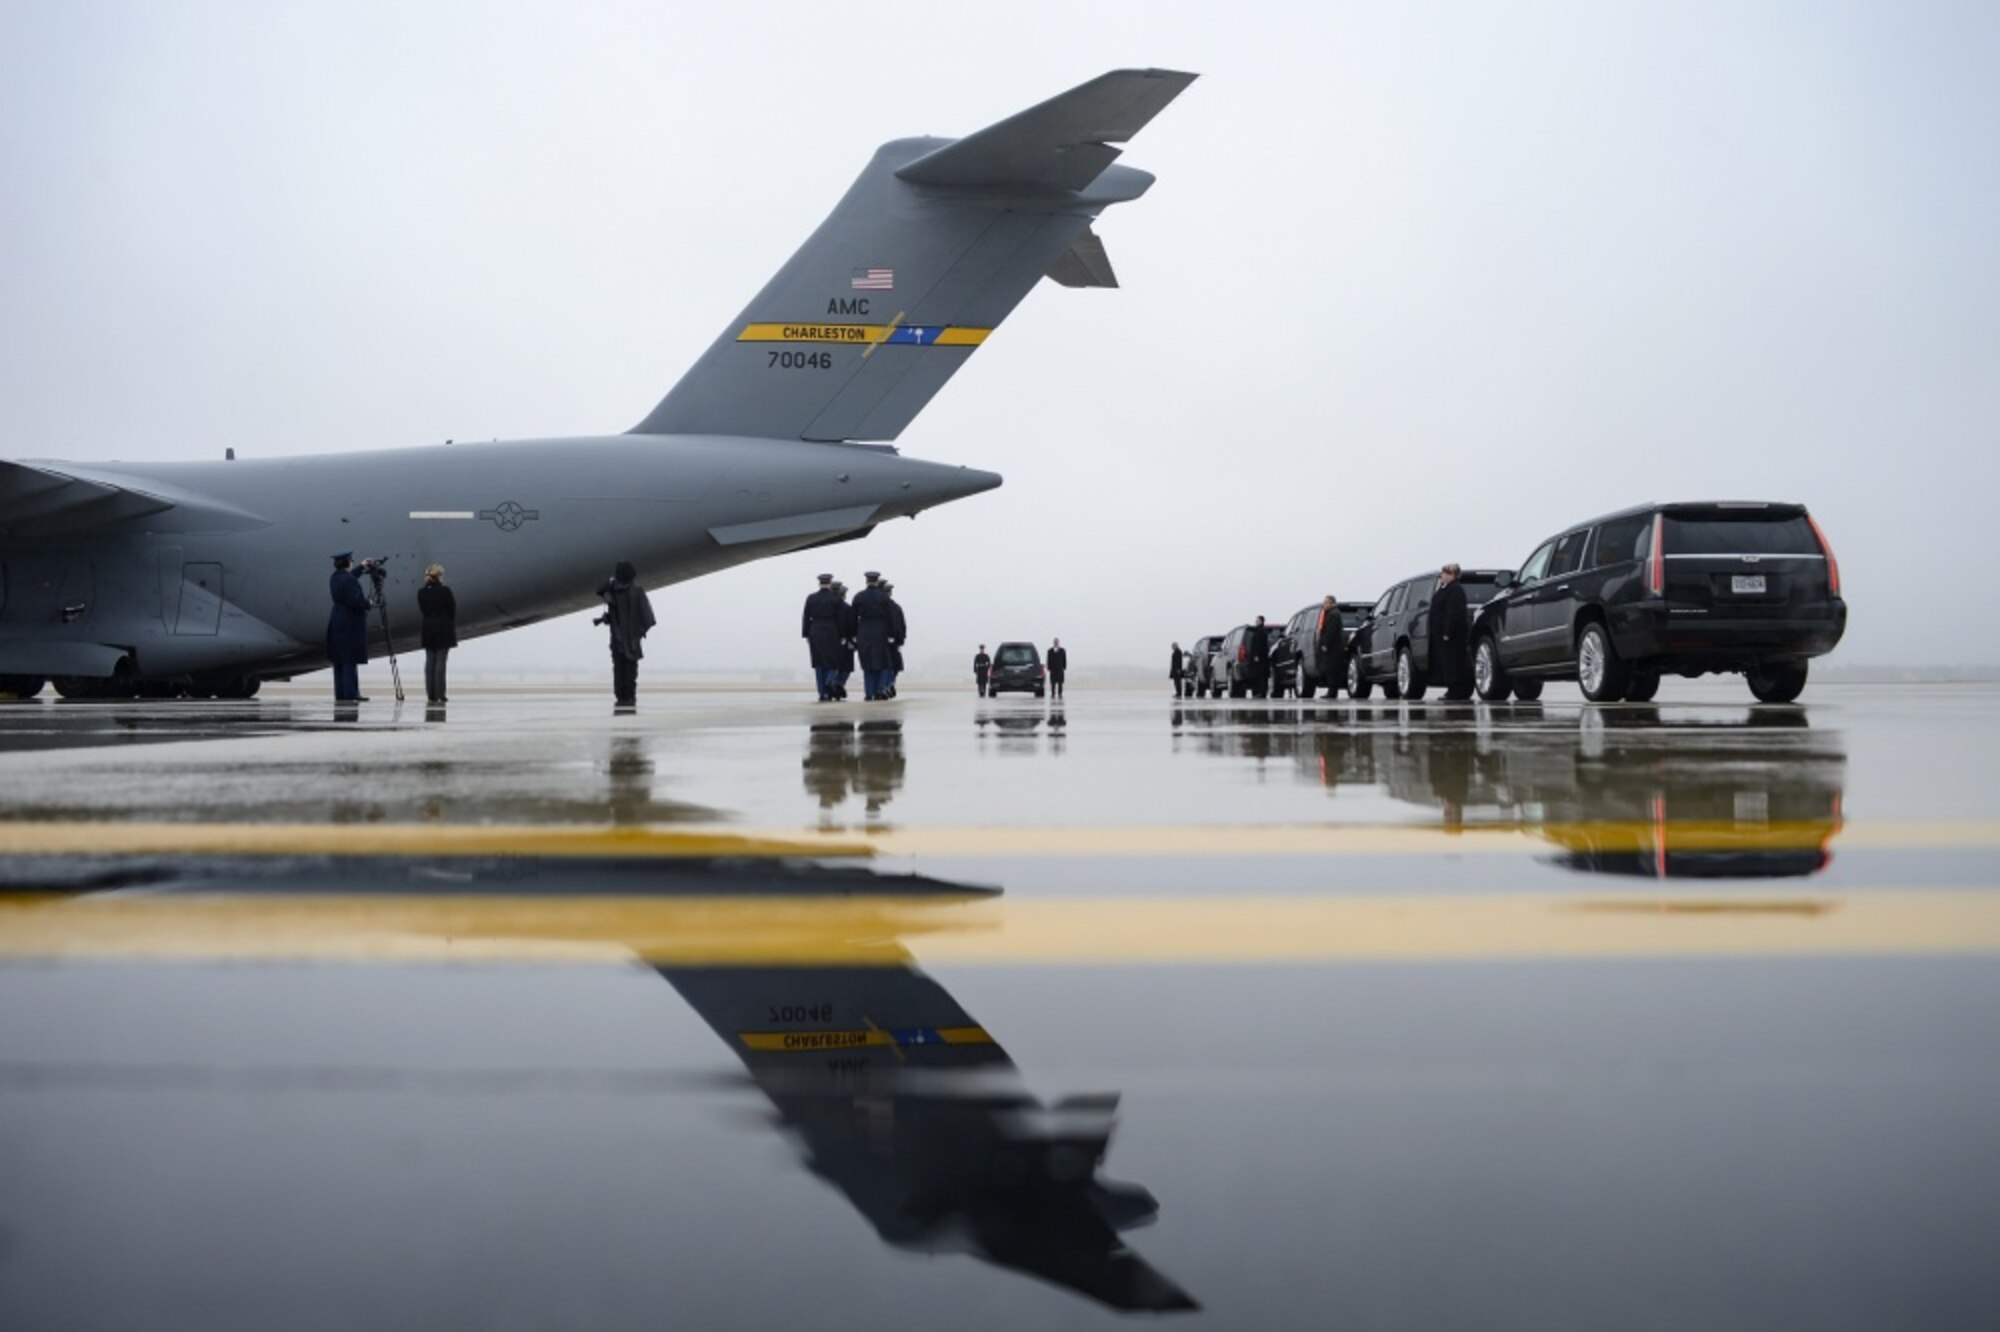 The U.S. Army 3rd Infantry Regiment (The Old Guard) body bearer team fall into formation as an Air Mobility Command C-17 Globemaster III arrives at Joint Base Andrews, Md. with the remains of World War II Army veteran and former Rep. John D. Dingell (D-Mich.) Feb. 12, 2019.